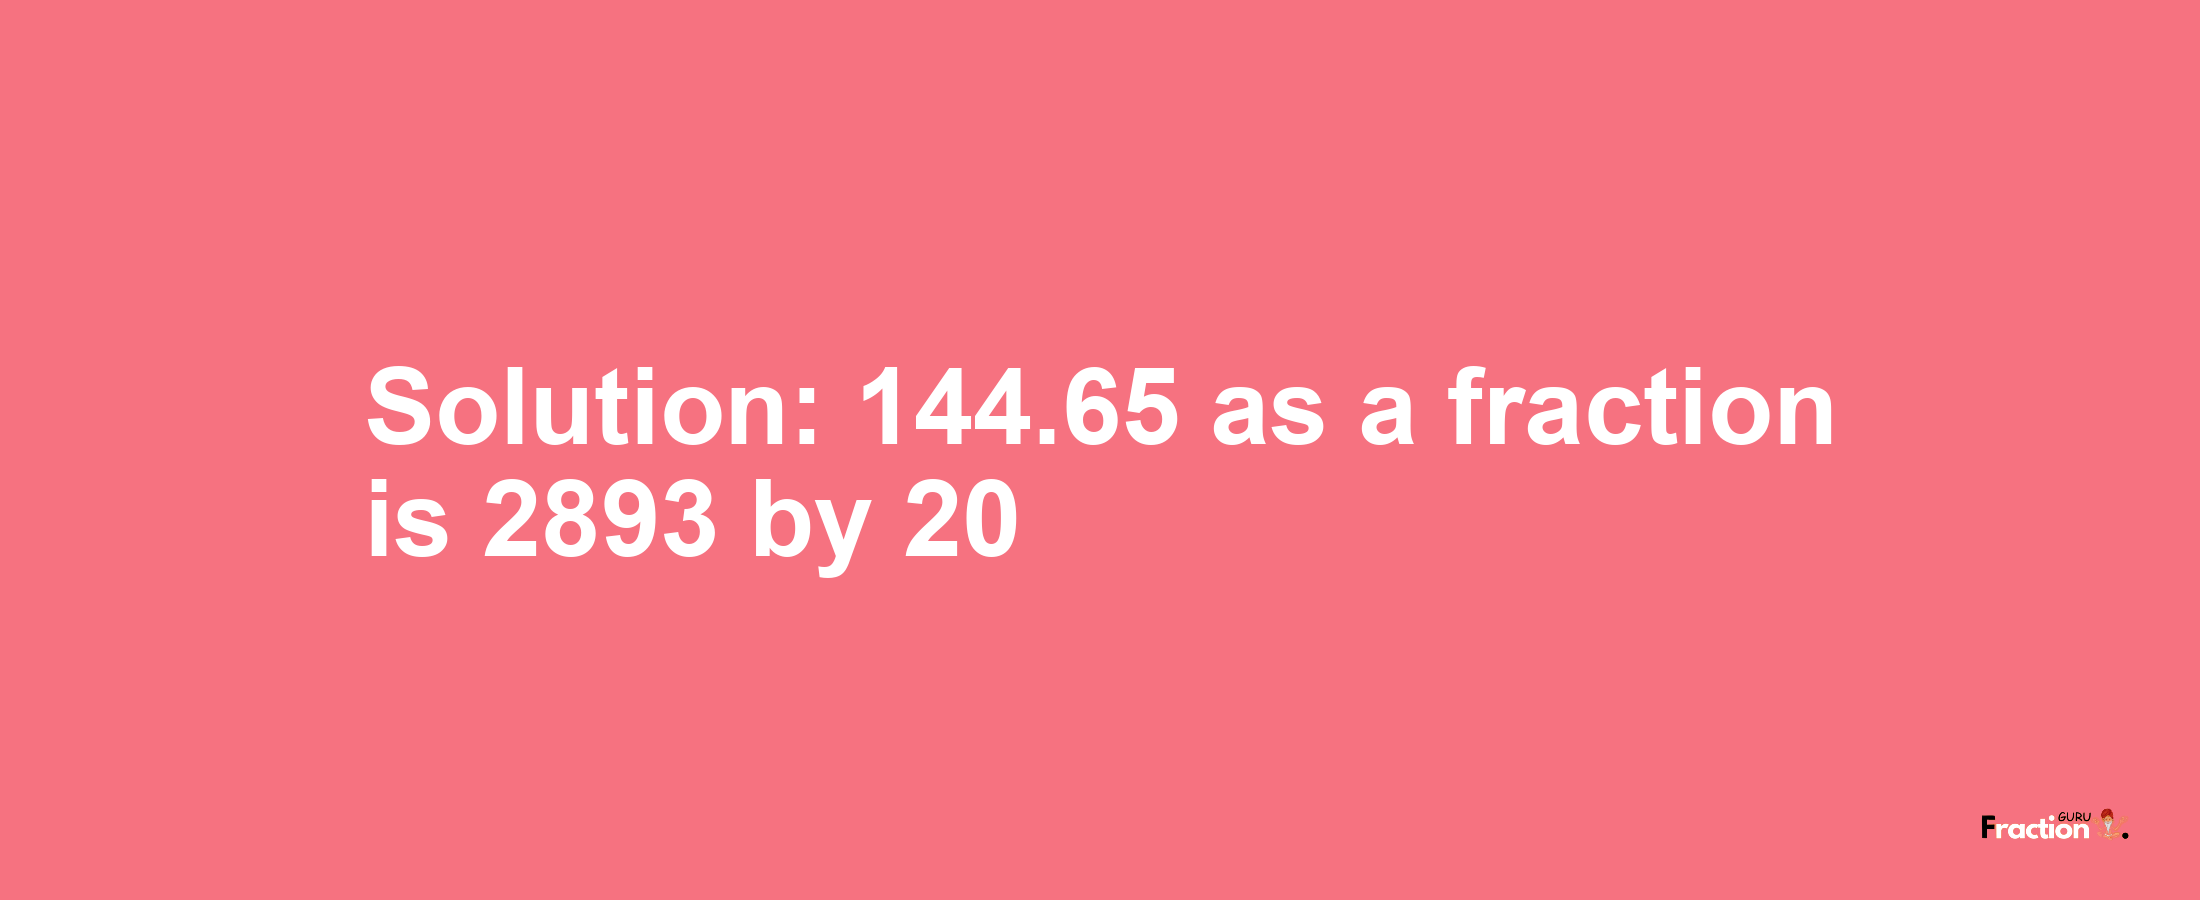 Solution:144.65 as a fraction is 2893/20